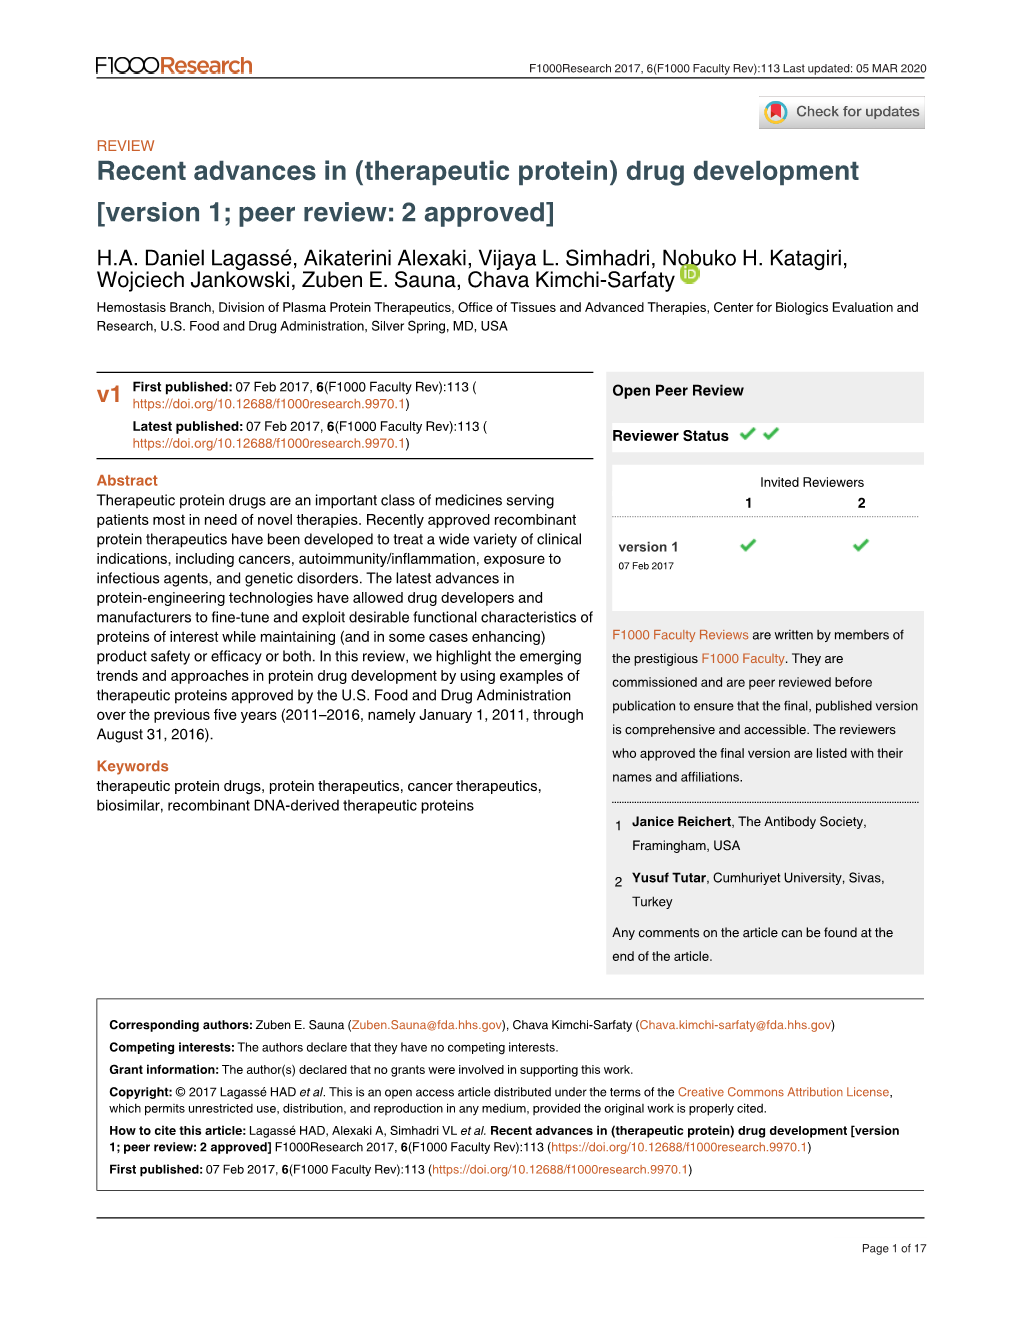 Drug Development [Version 1; Peer Review: 2 Approved] H.A